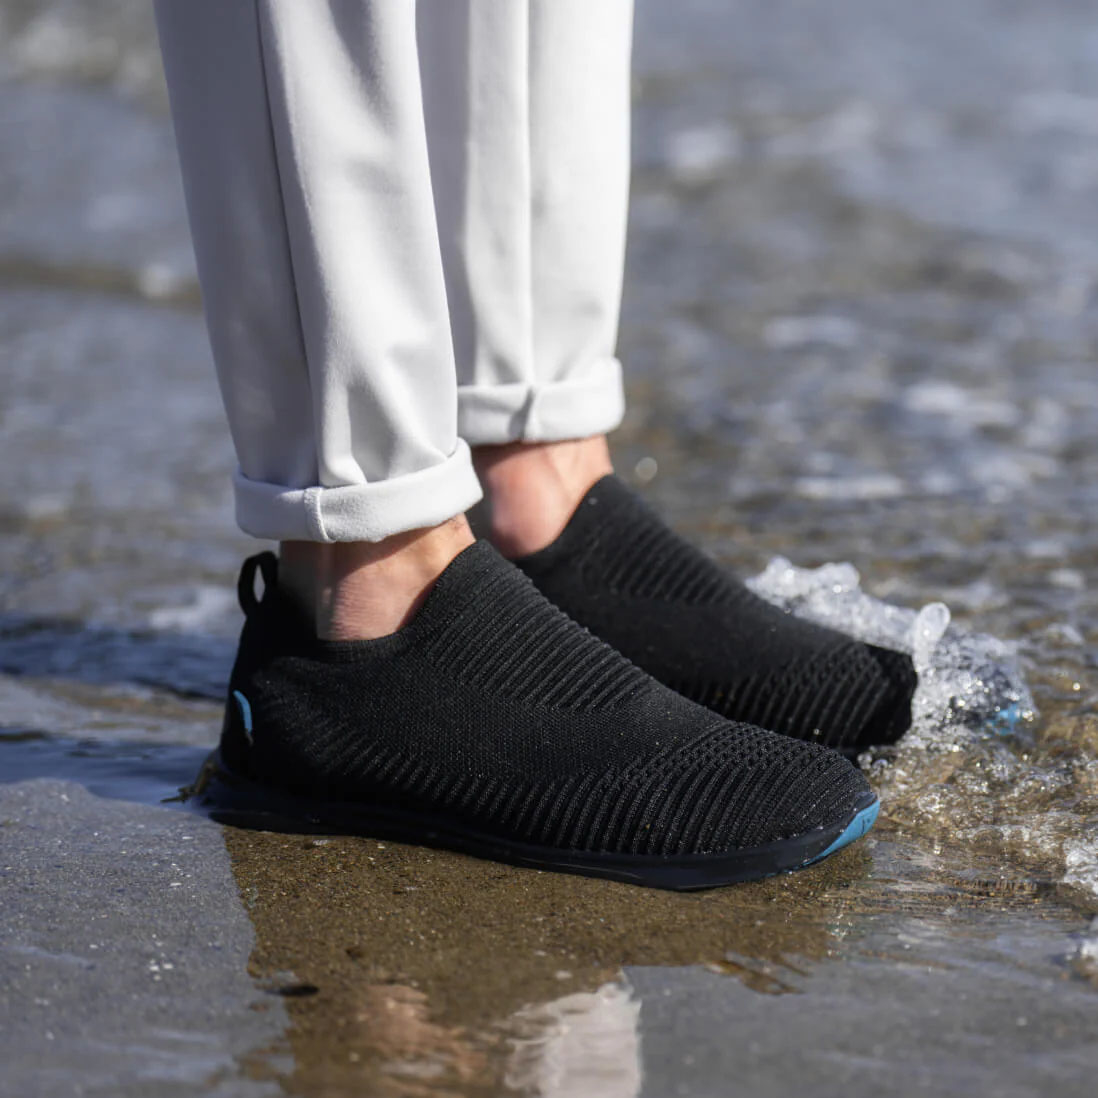 A person wearing slip on sneakers on the beach